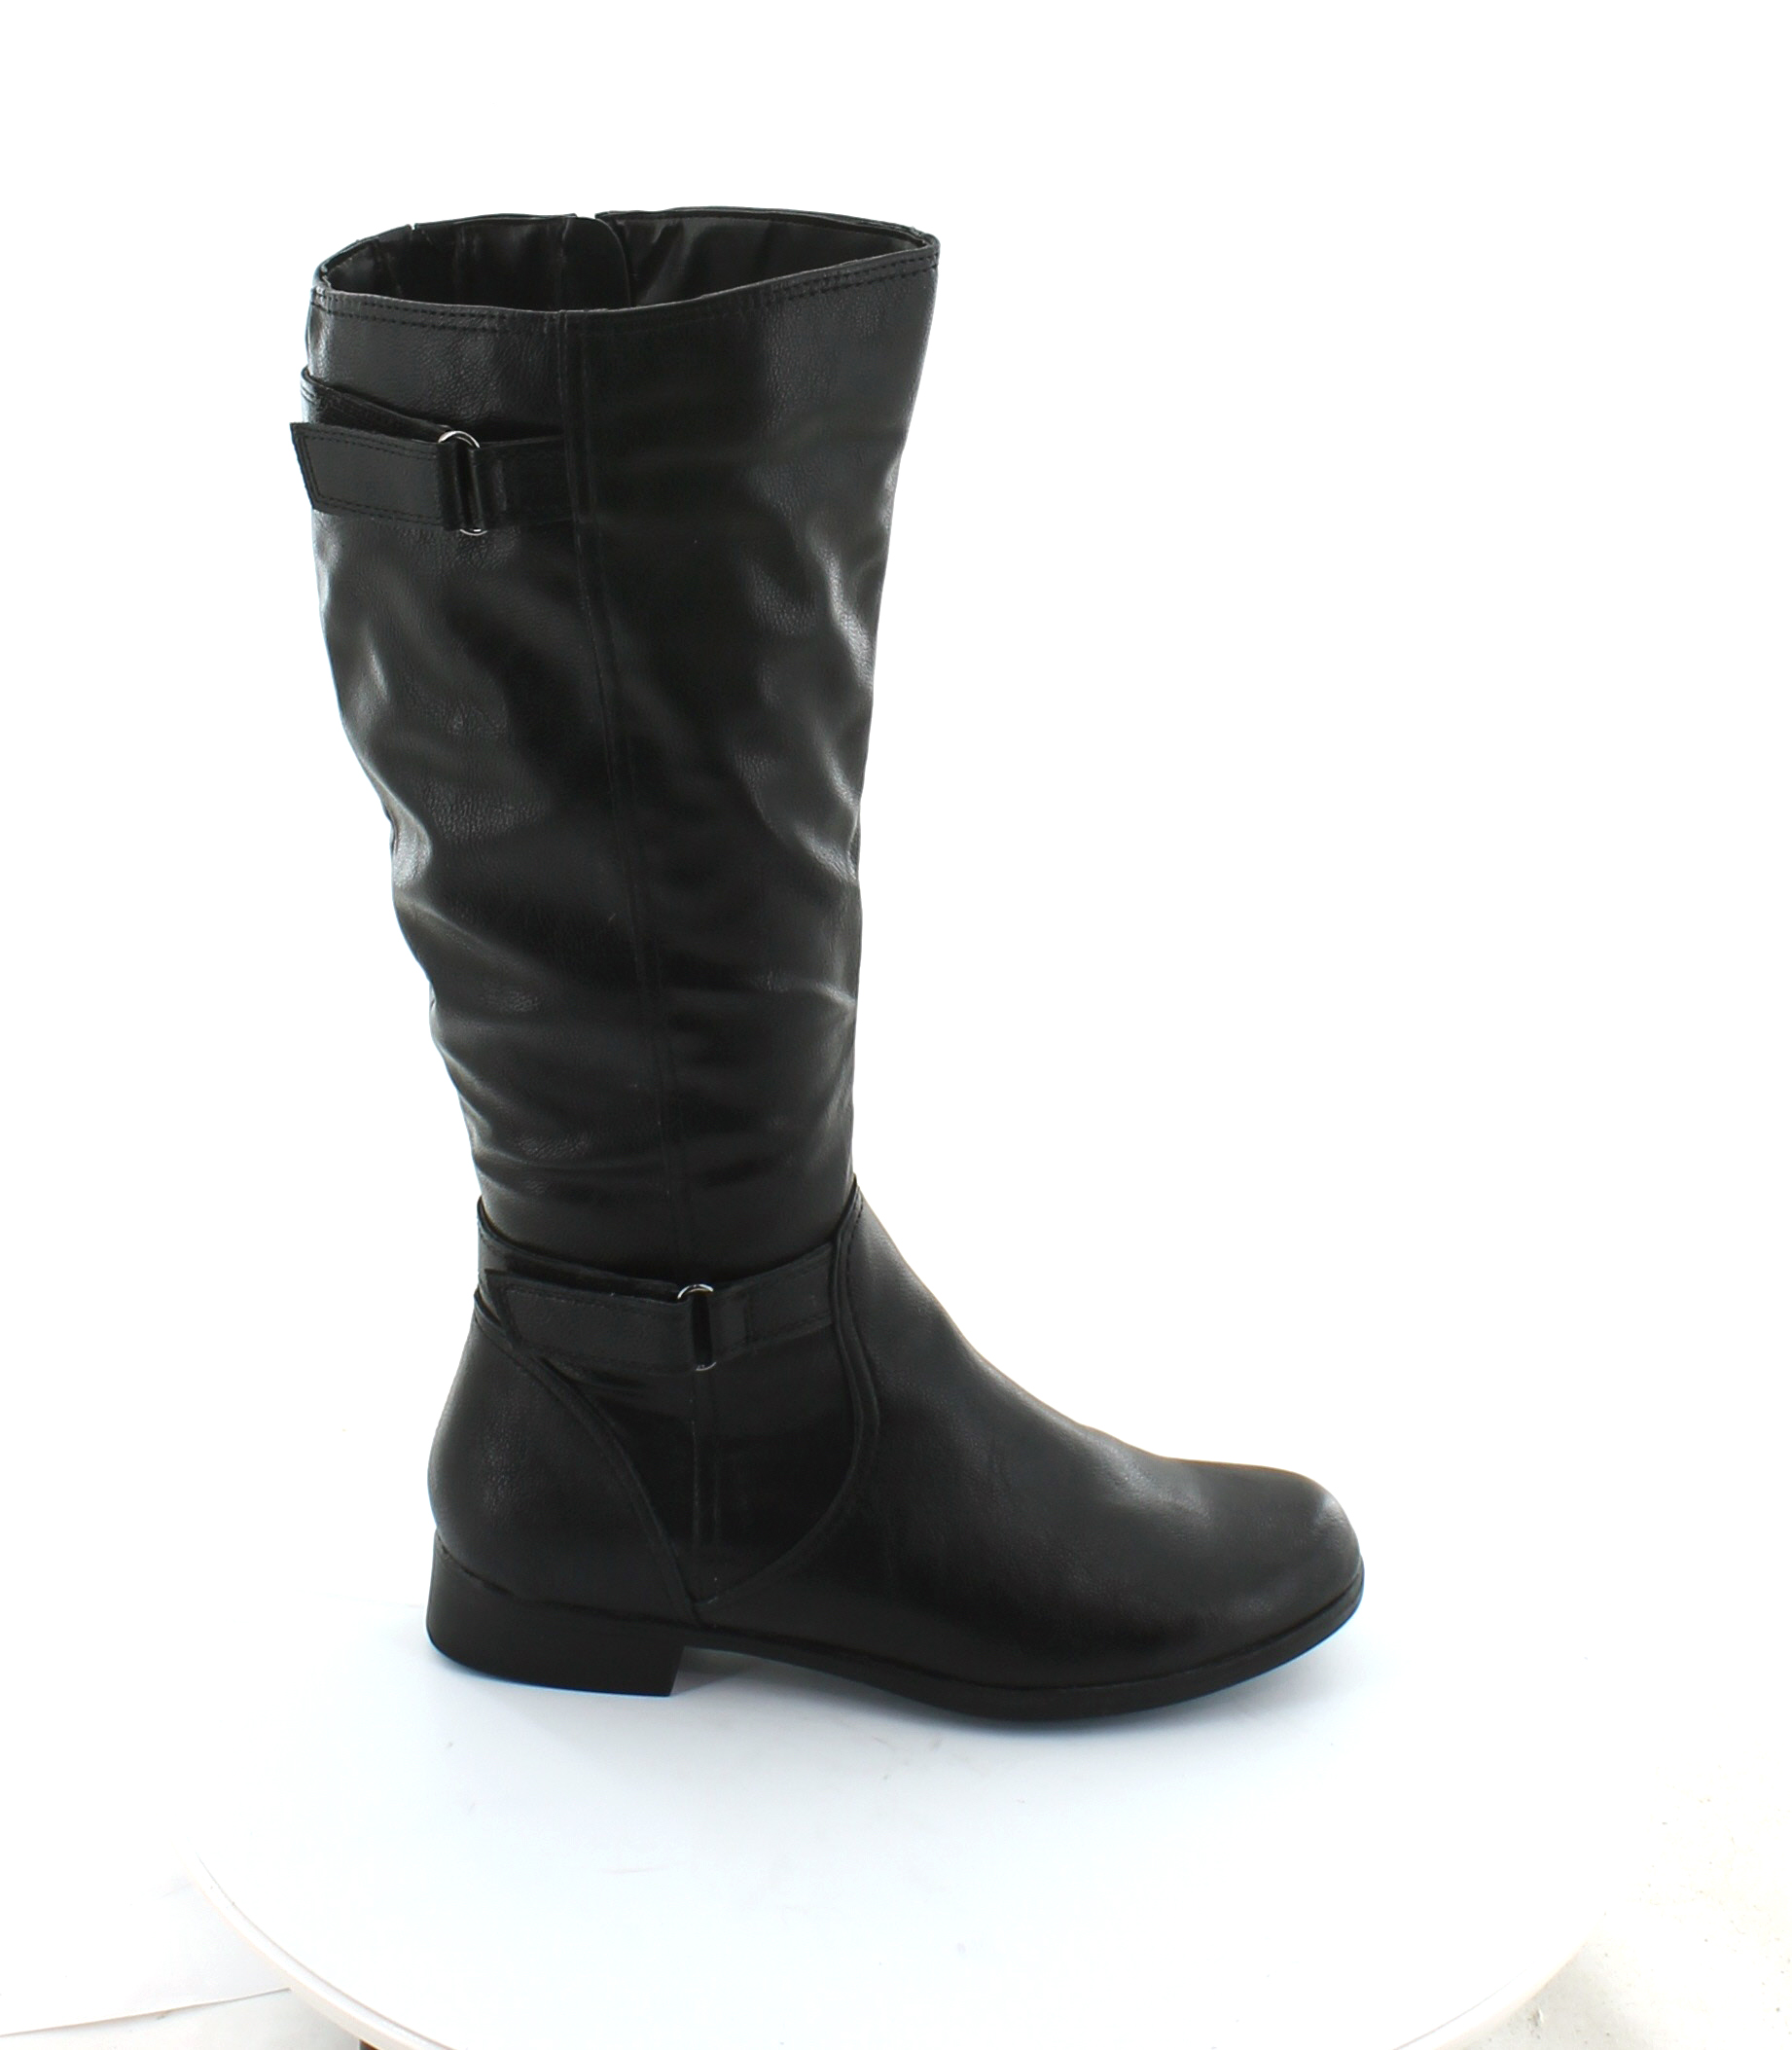 ... Hush Puppies New Motive_16 Black Womens Shoes Size 7 M Boots MSRP 130